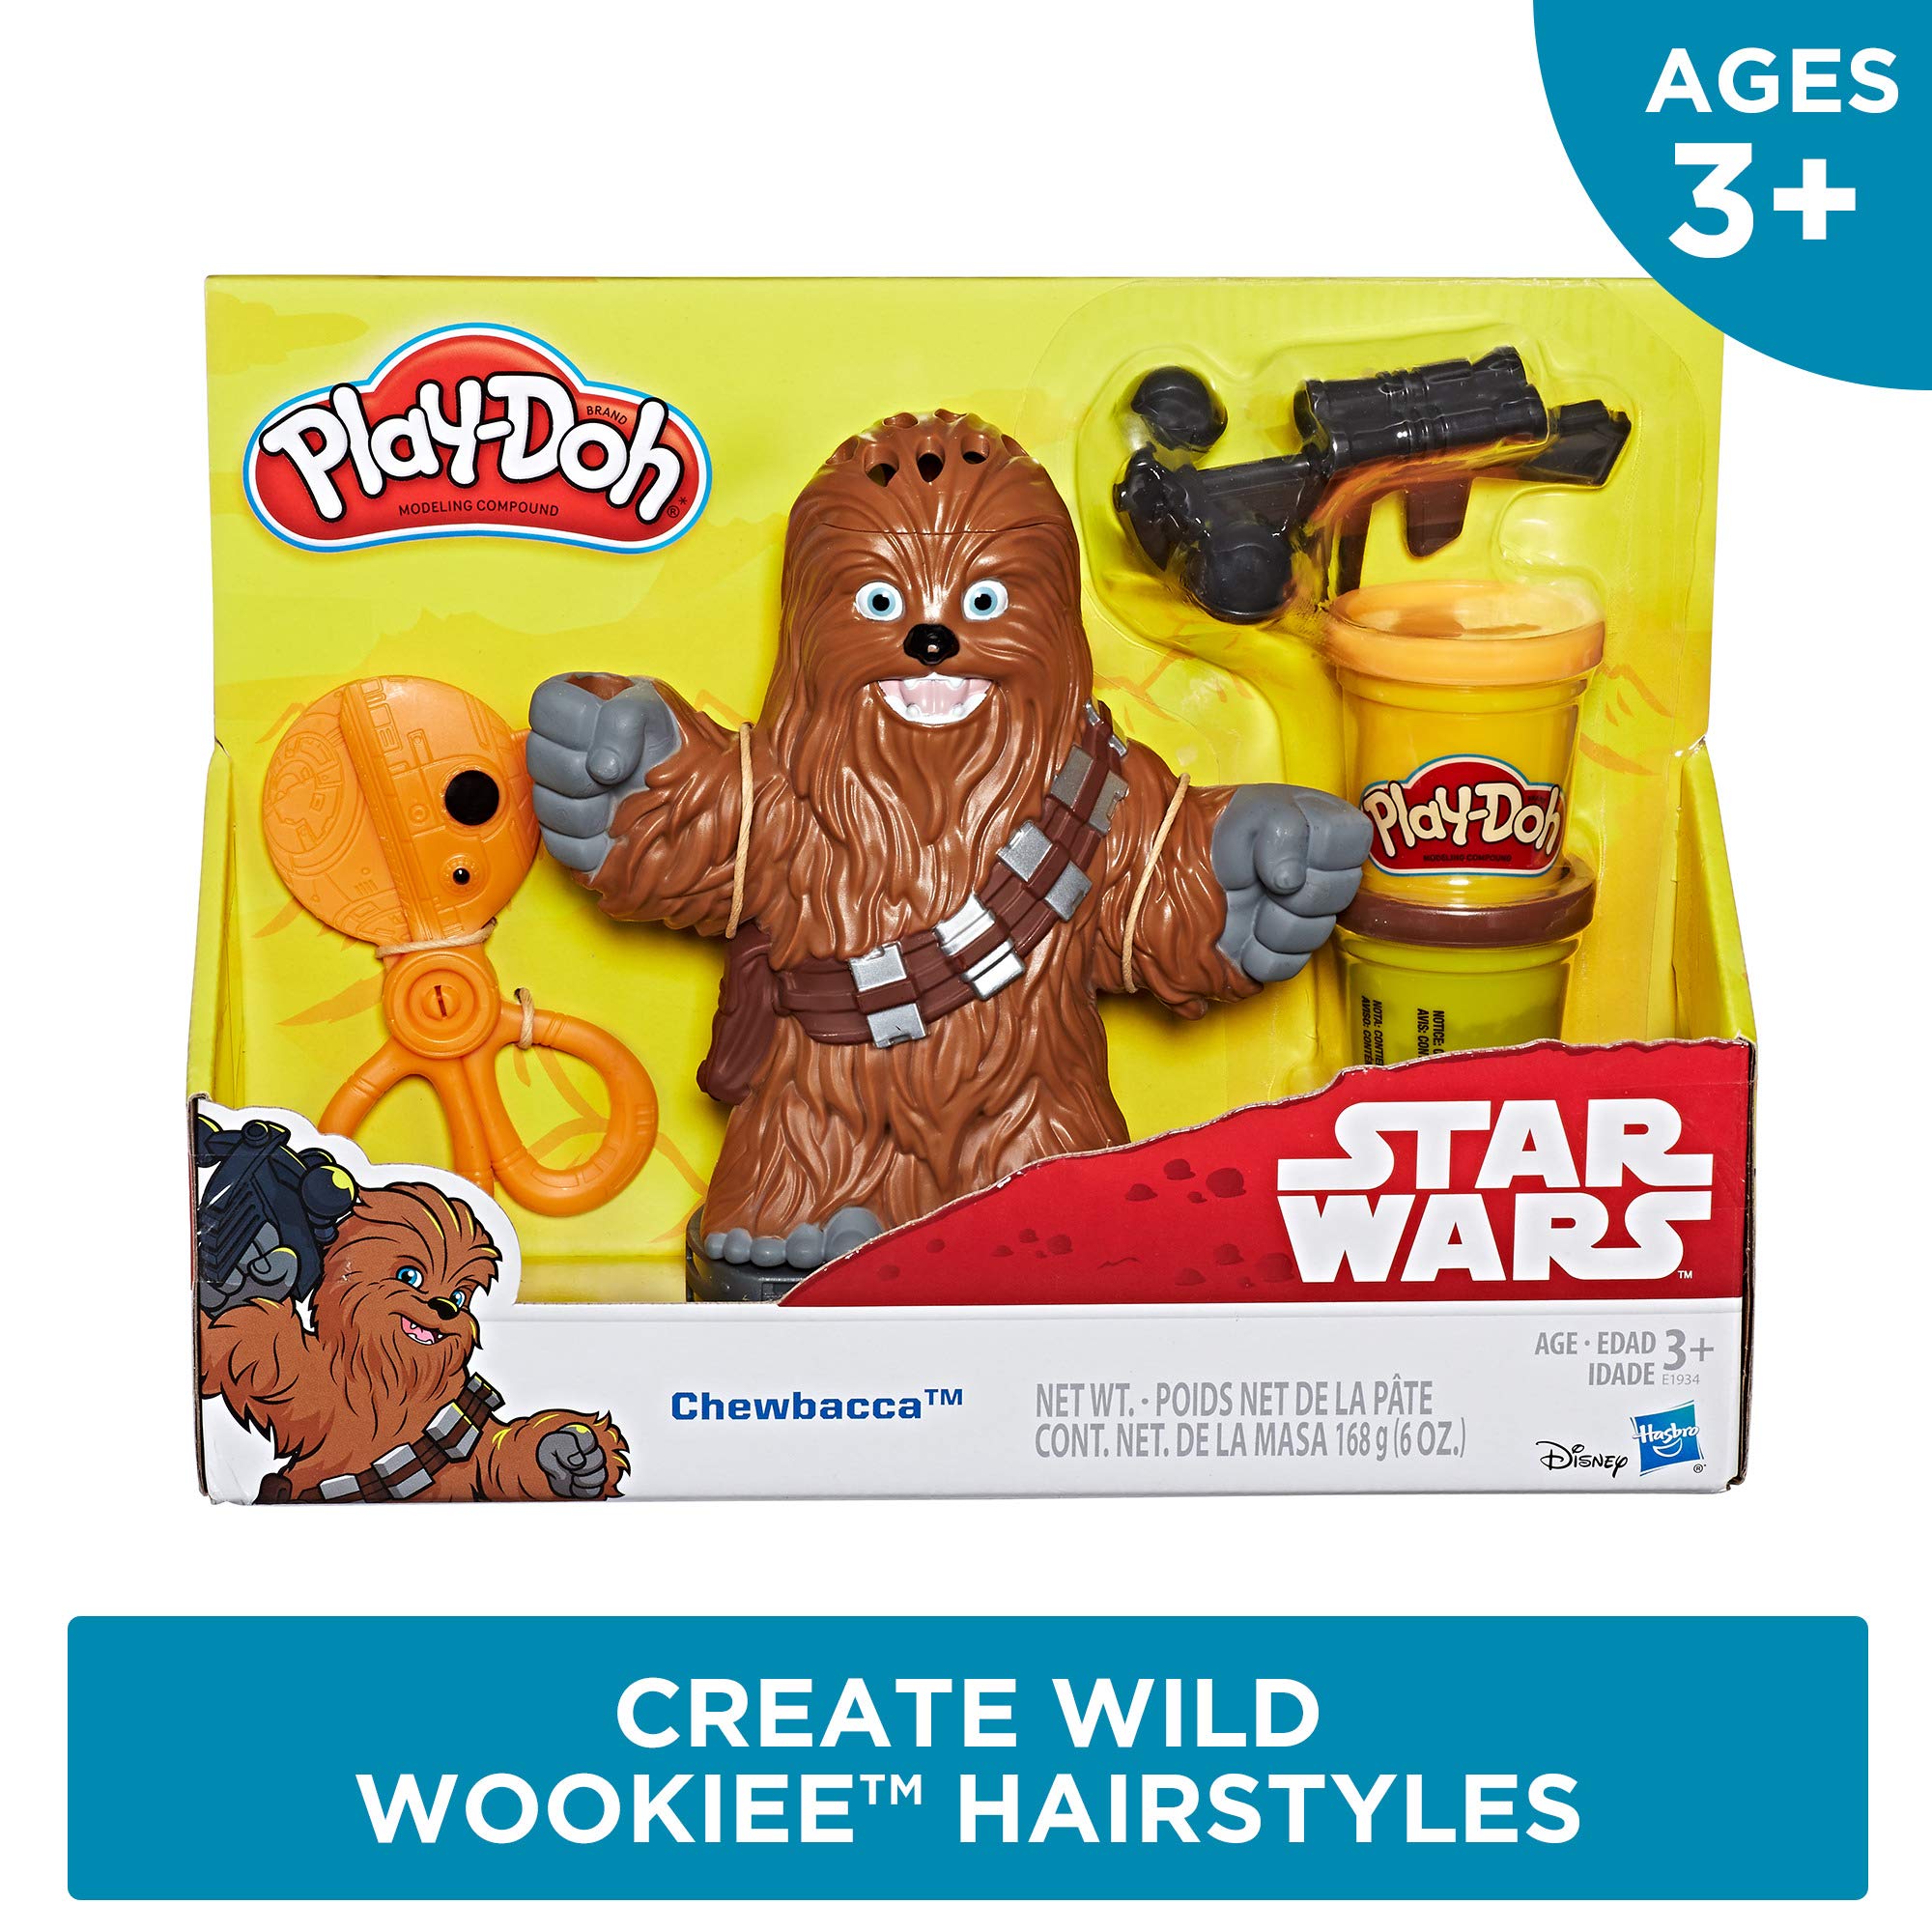 Play-Doh Star Wars Chewbacca, 2 oz. Cans of 3 Non-Toxic Colors ()